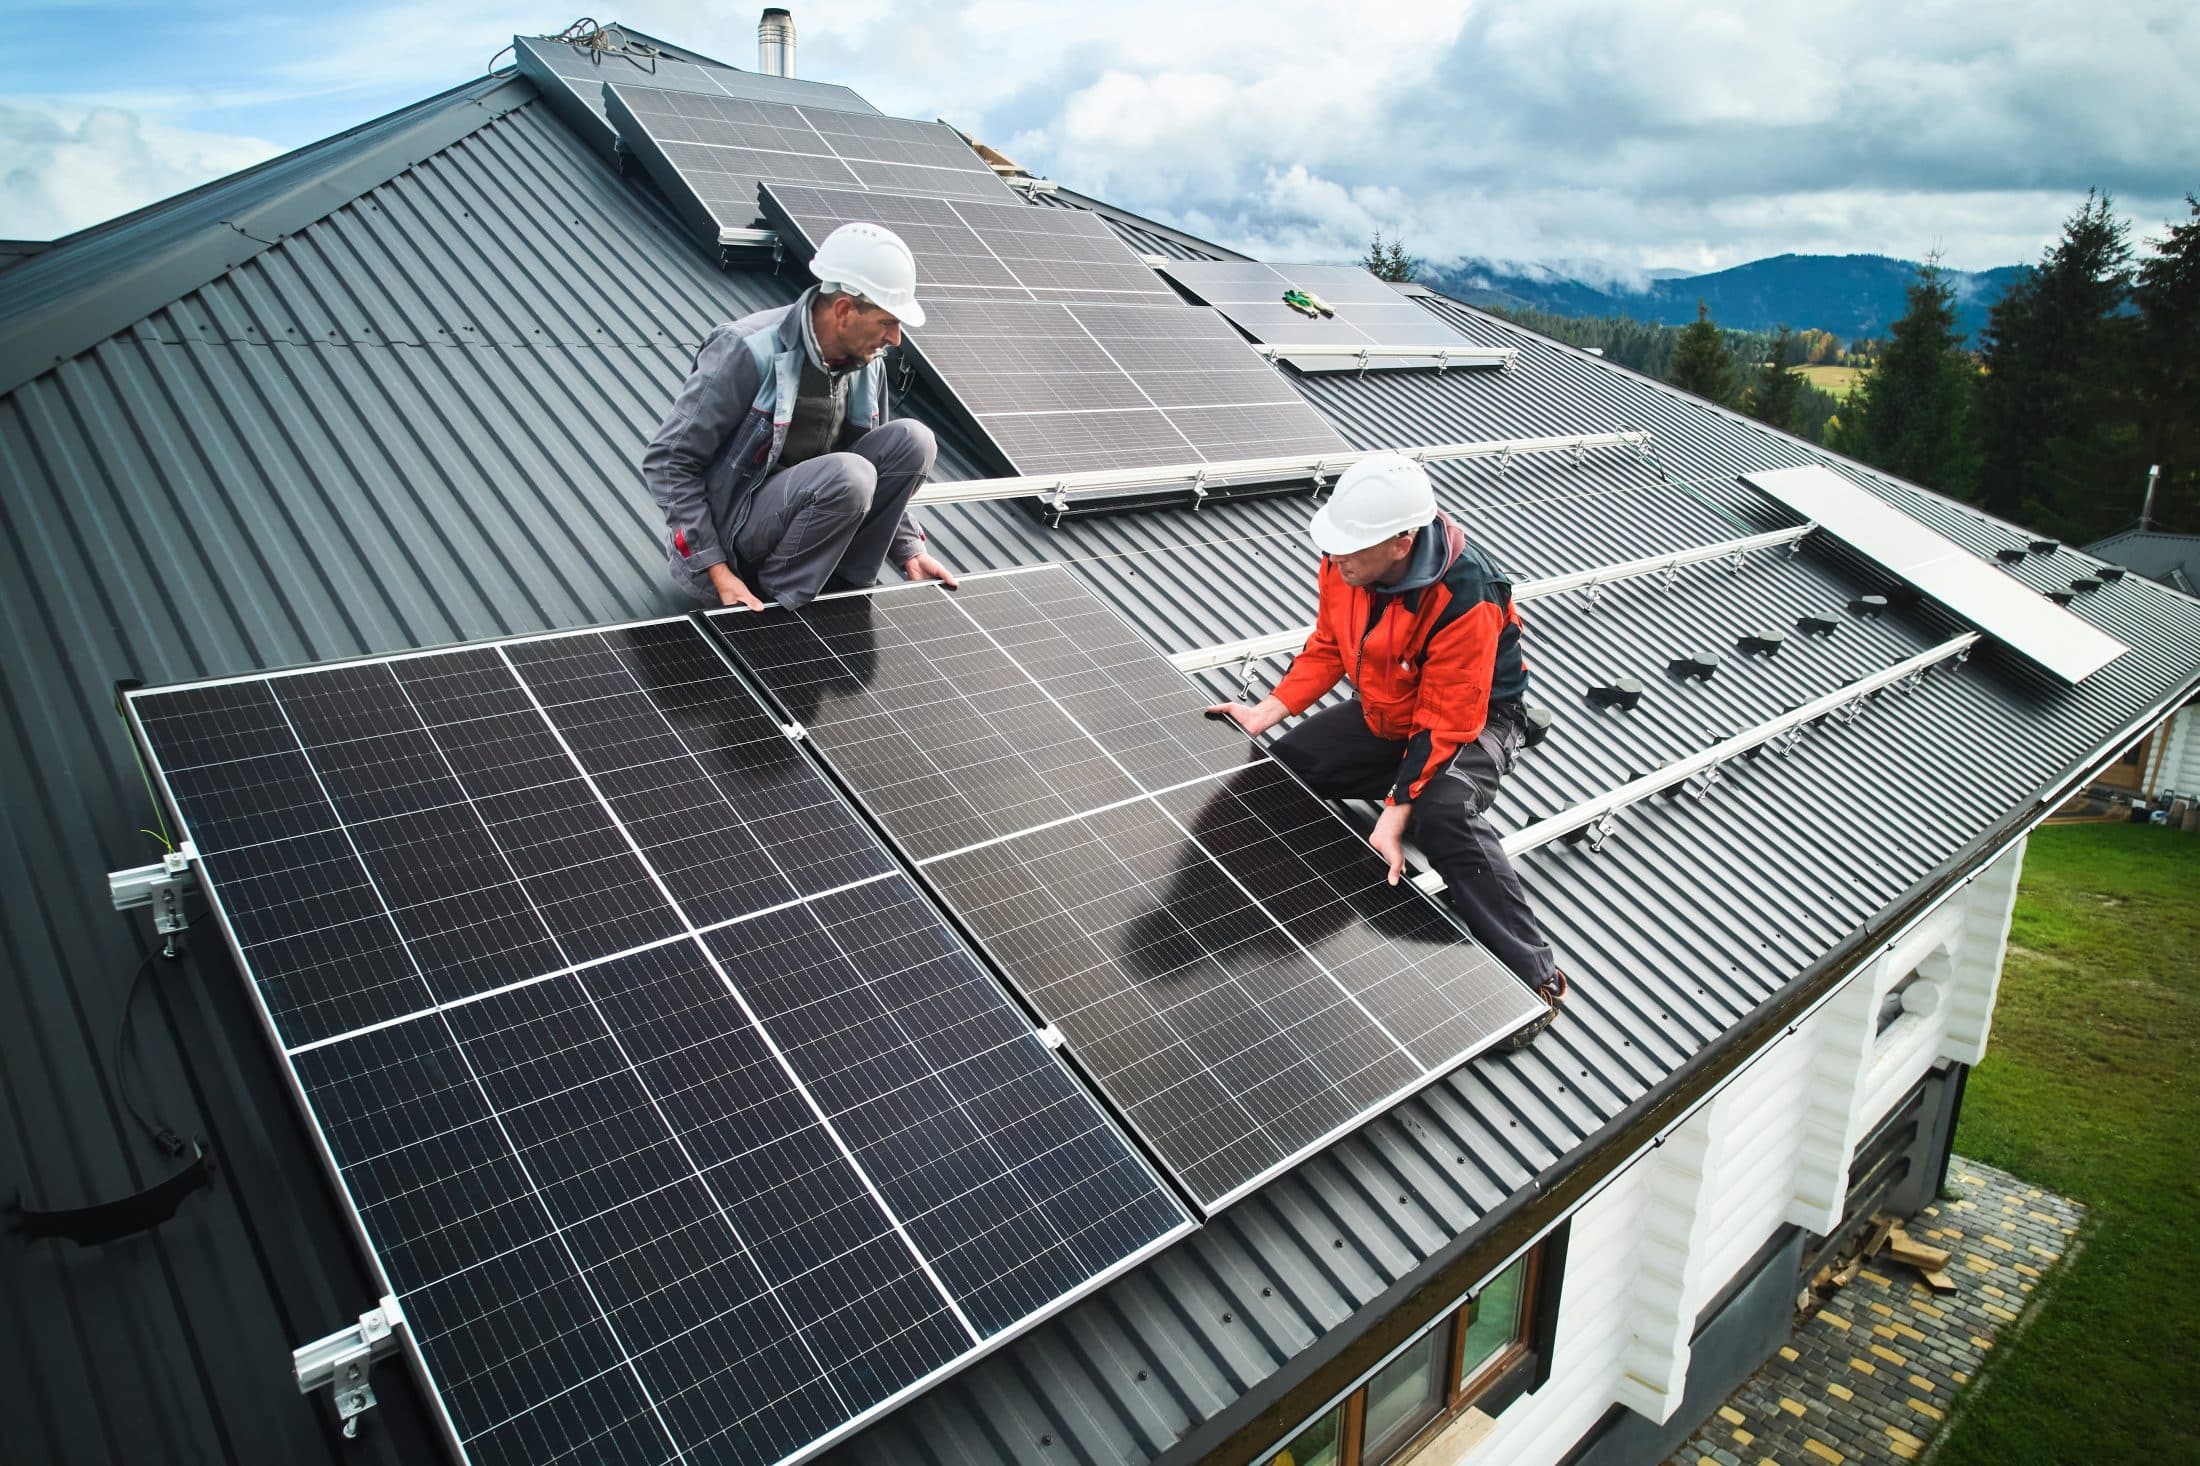 Men workers installing solar panels on roof of house.